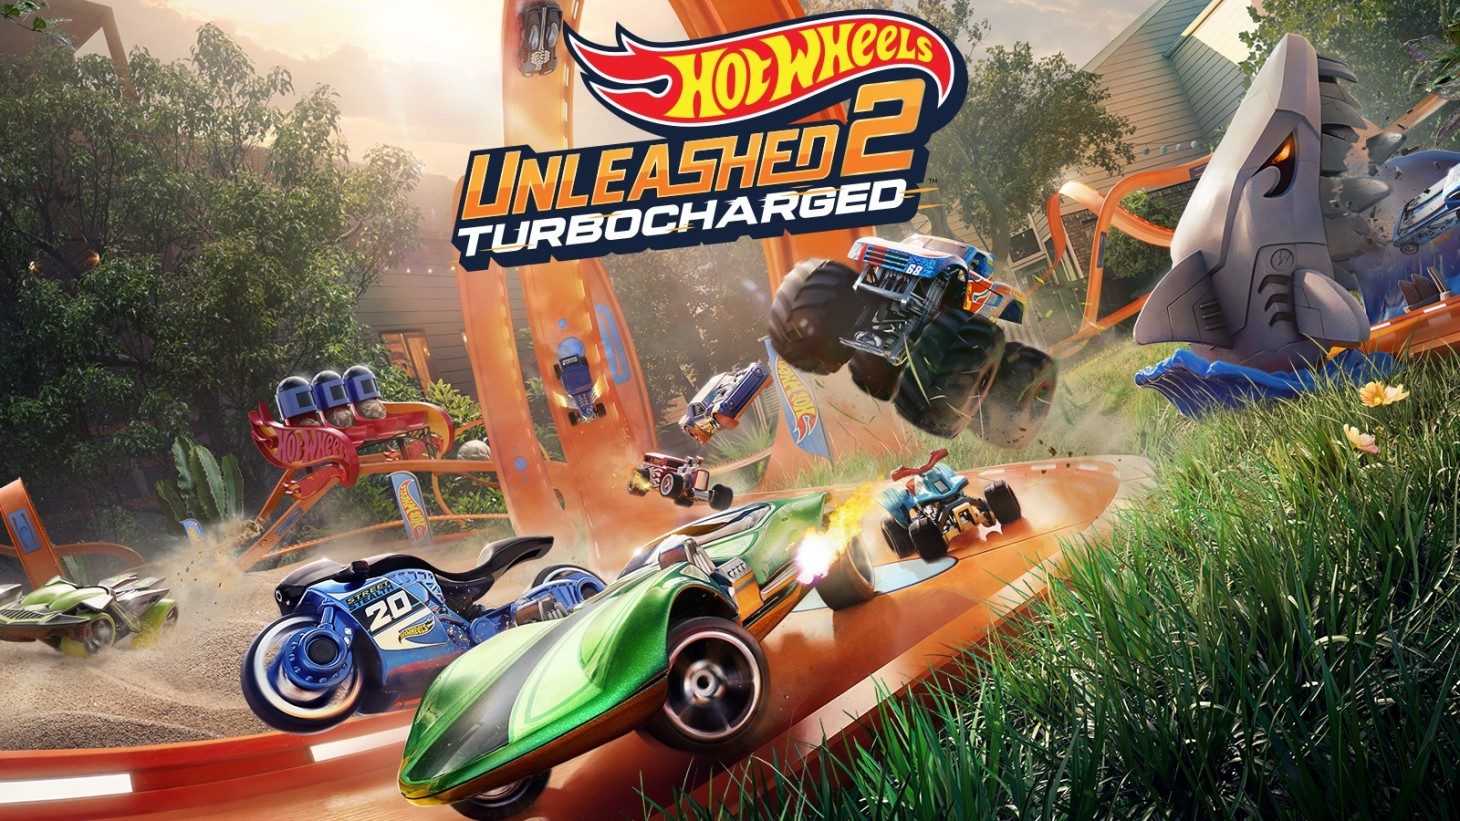 Hot Wheels Unleashed 2: Turbocharged Speeds To Consoles This Fall